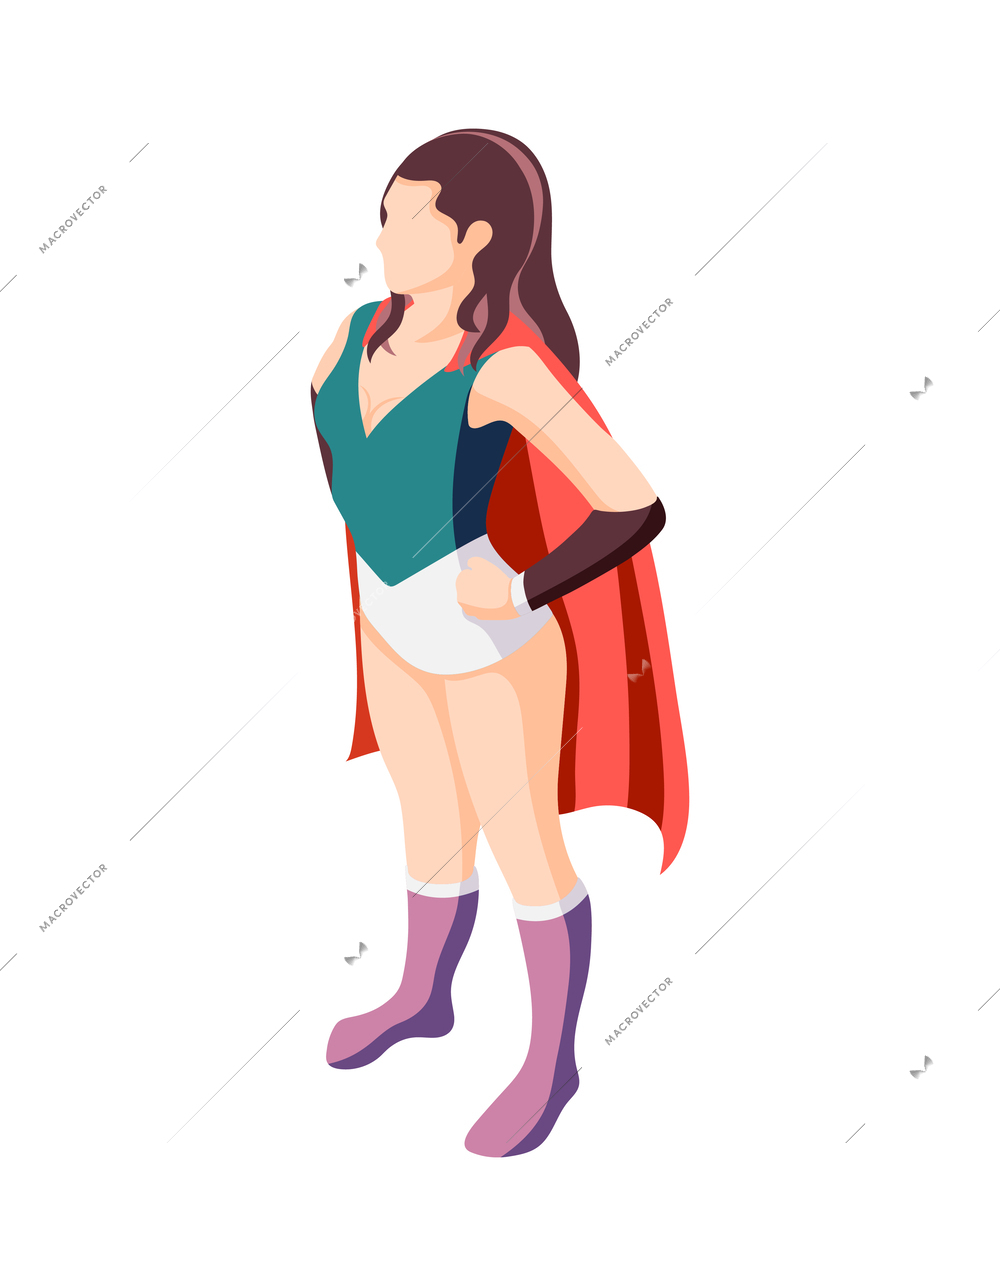 Masquerade cosplay isometric composition with isolated human character wearing festive costume vector illustration